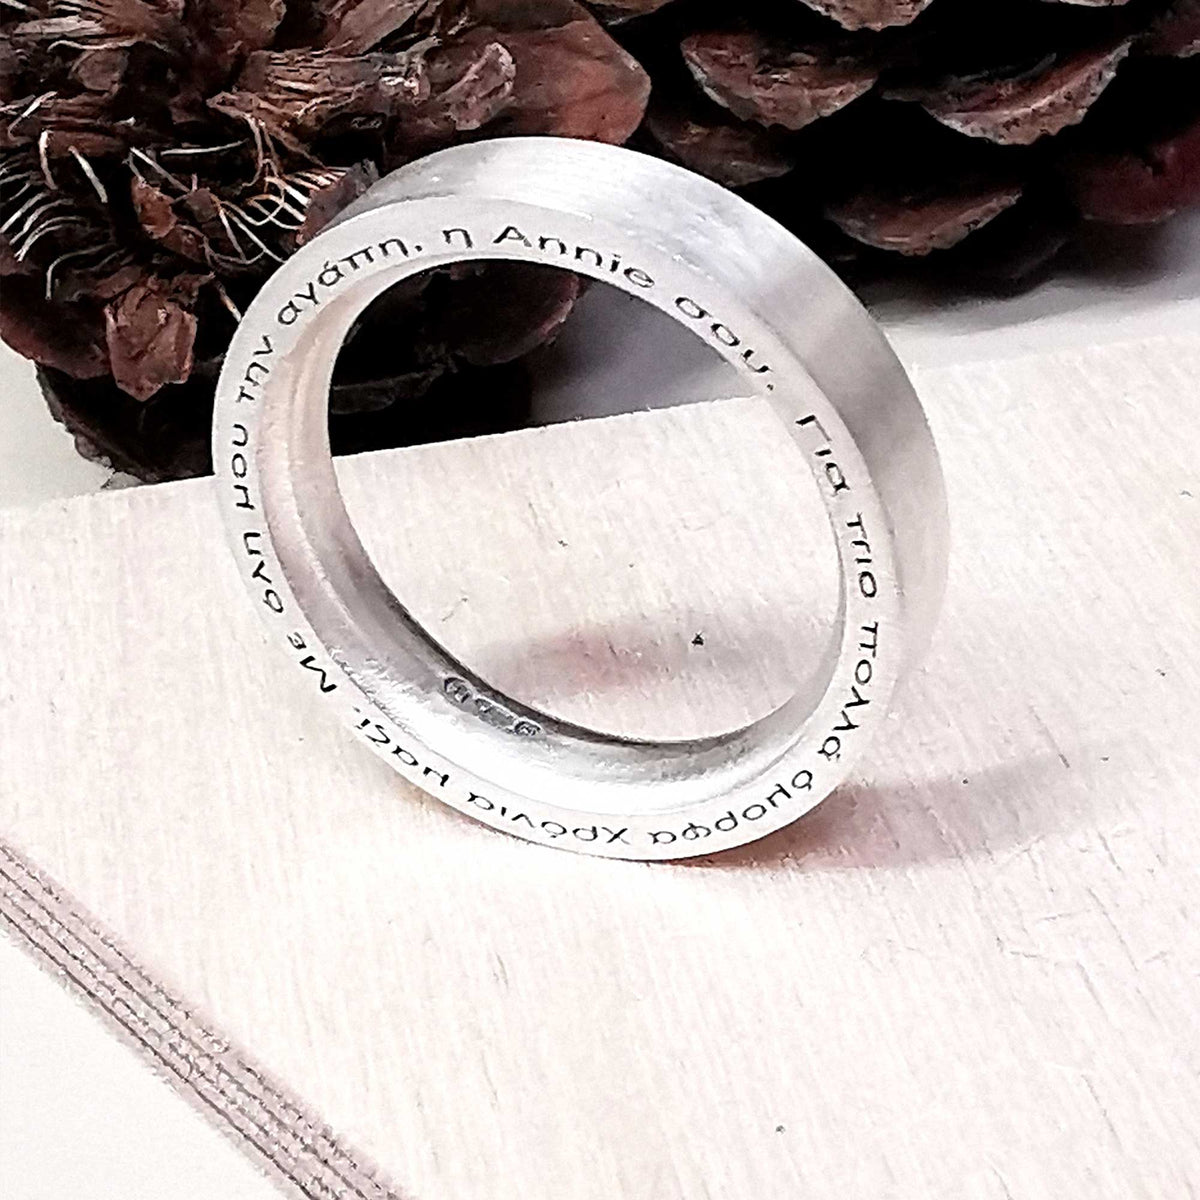 secret message mens personalised ring engraved on edge greek font Off the map jewellery